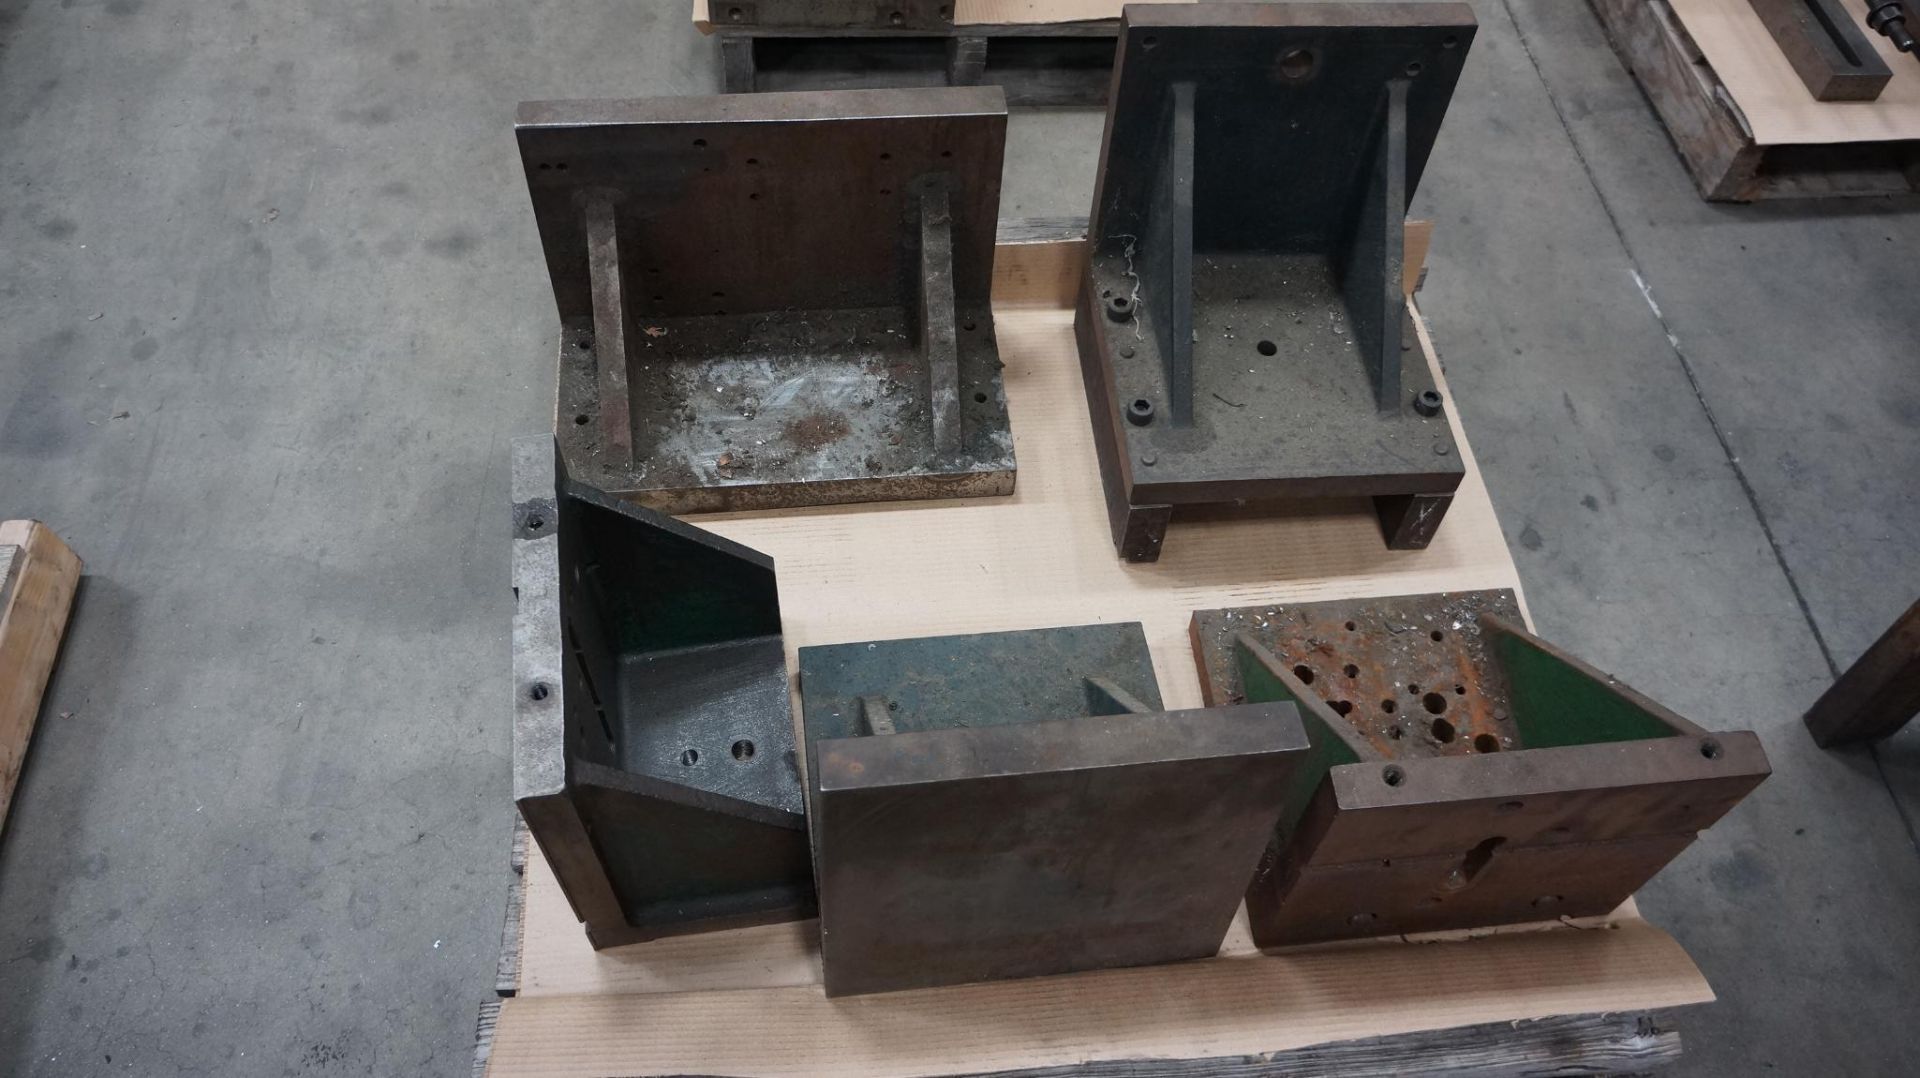 LOT OF ANGLE PLATES (THREE PALLETS) approx. (15) ranging in size from 12" x 24"W. x 17" tall to 5" x - Image 4 of 8